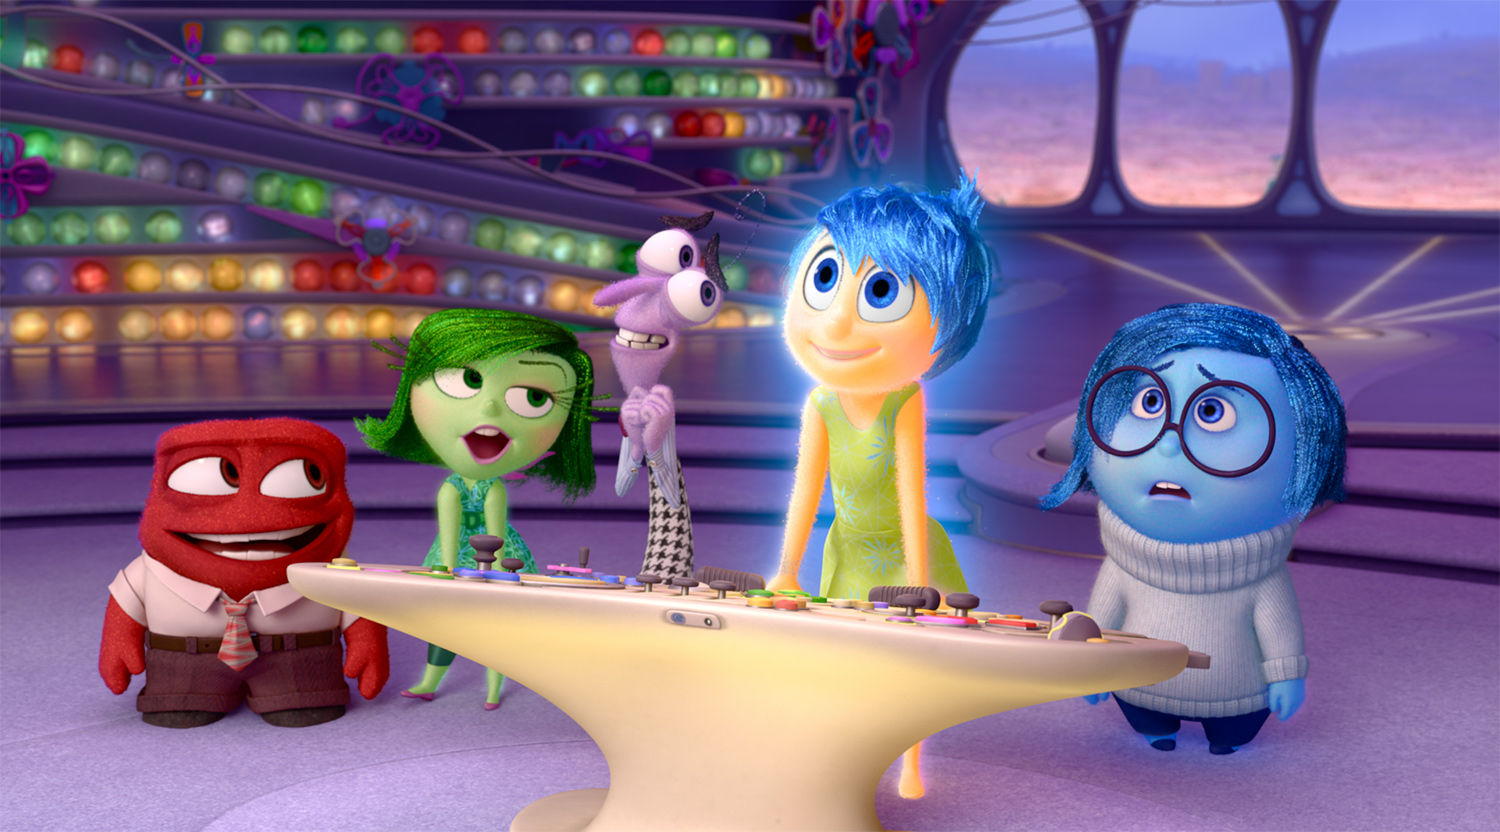 The 10 Pixar Films That Raked in the Most Cash 1